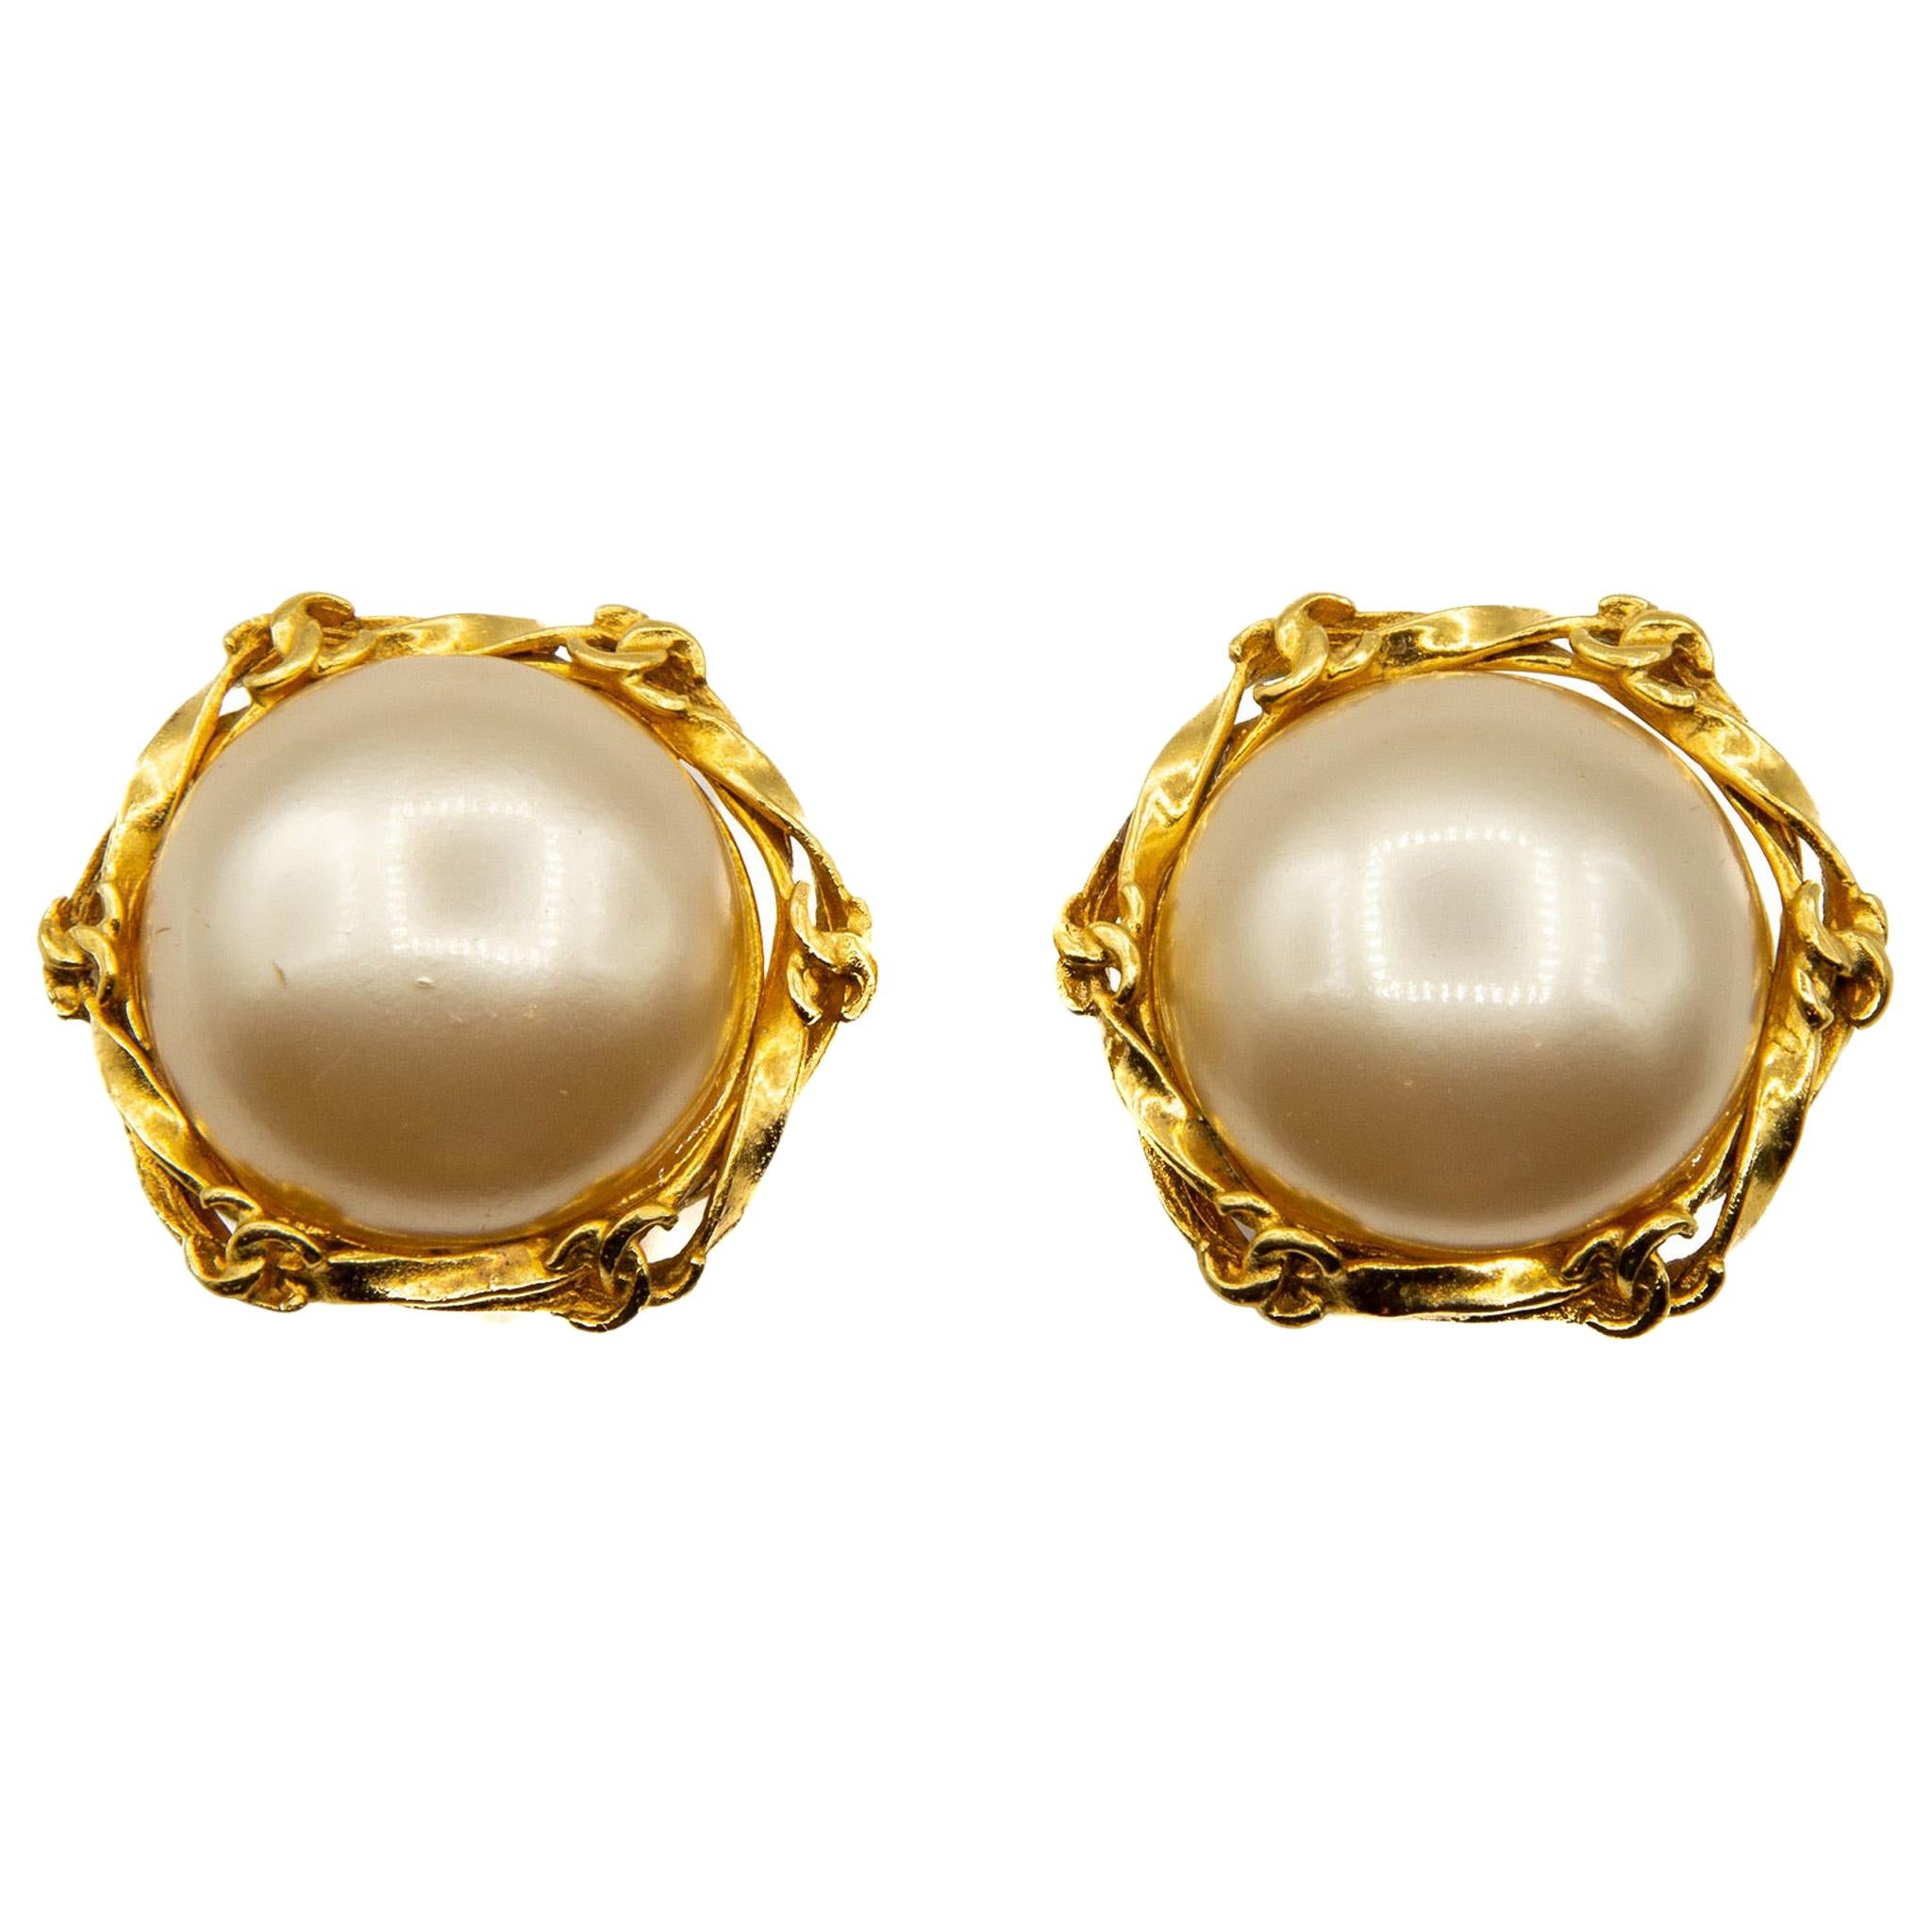 1995 Faux Pearl and Gilt Metal Clip-on Earrings